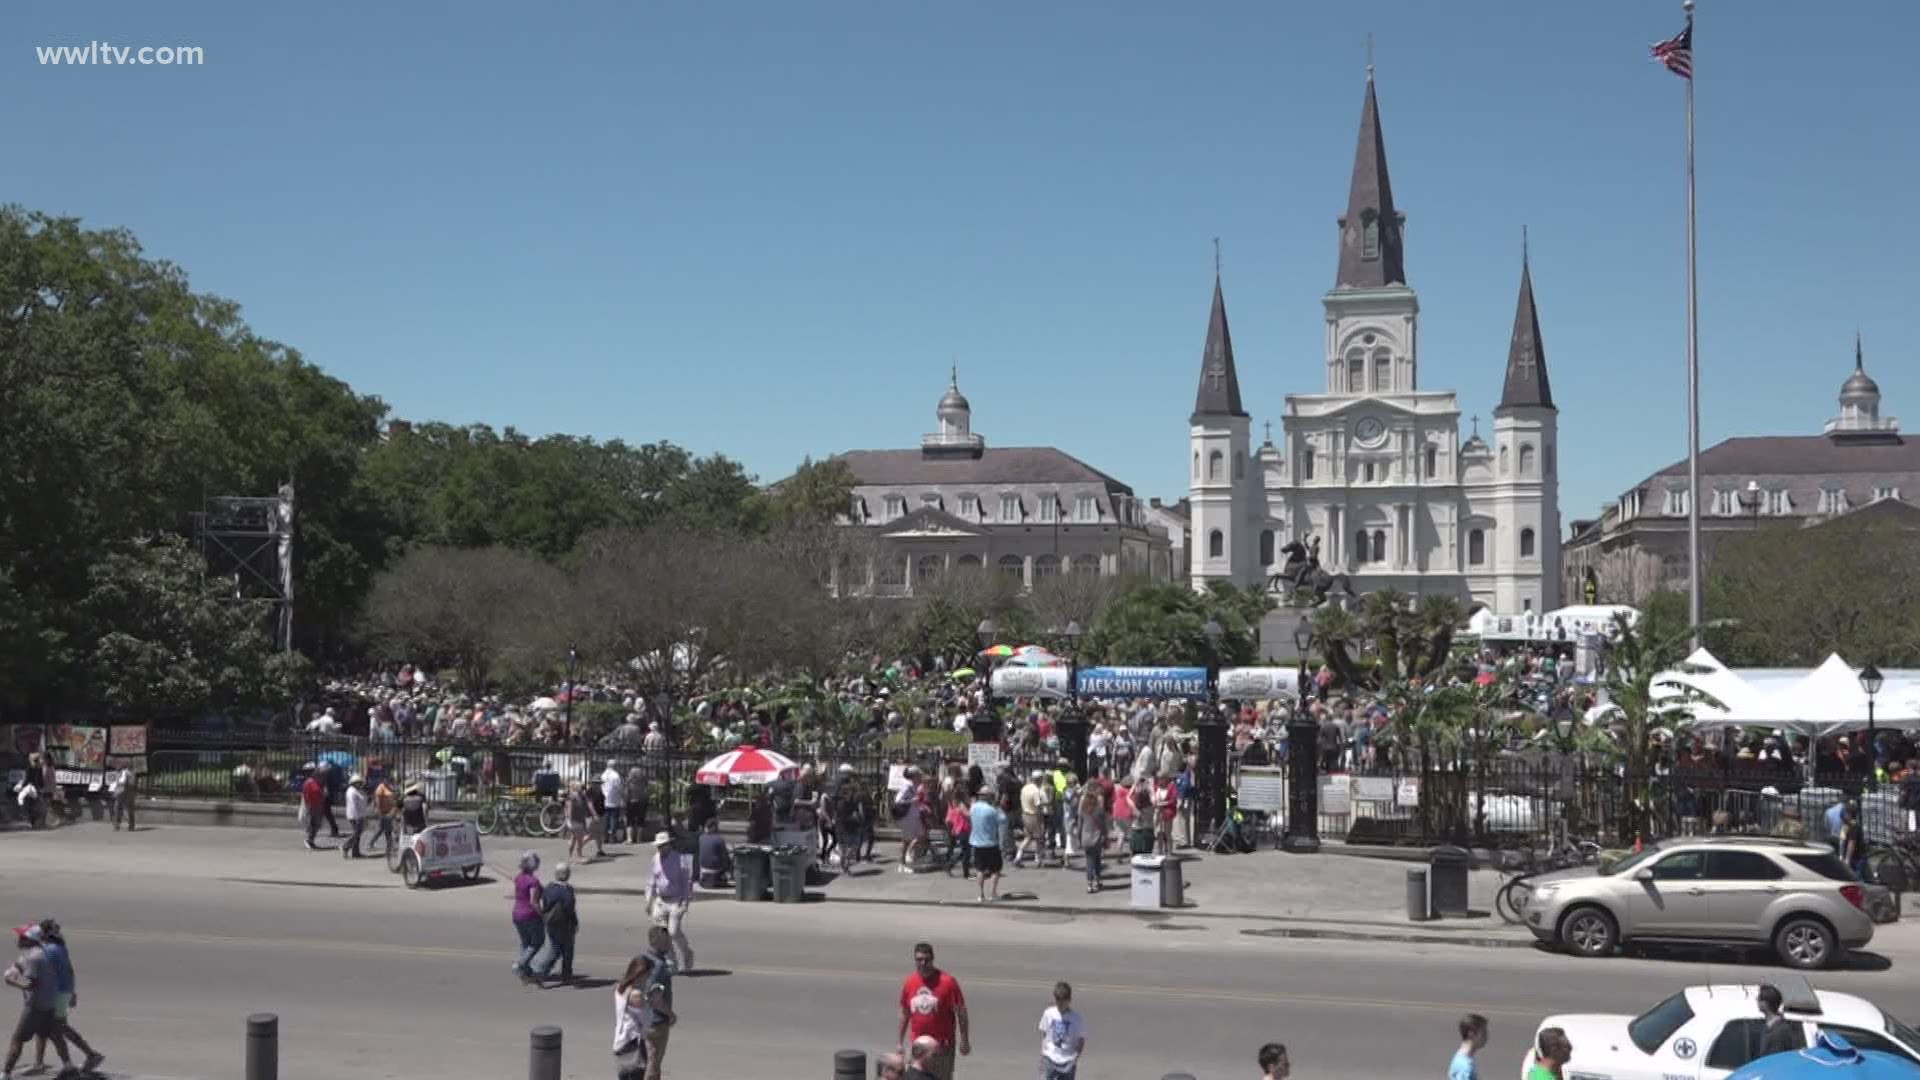 From being cancelled in 2020 it is looking hopeful that the French Quarter Fest may make a return in 2021 just at a later date.